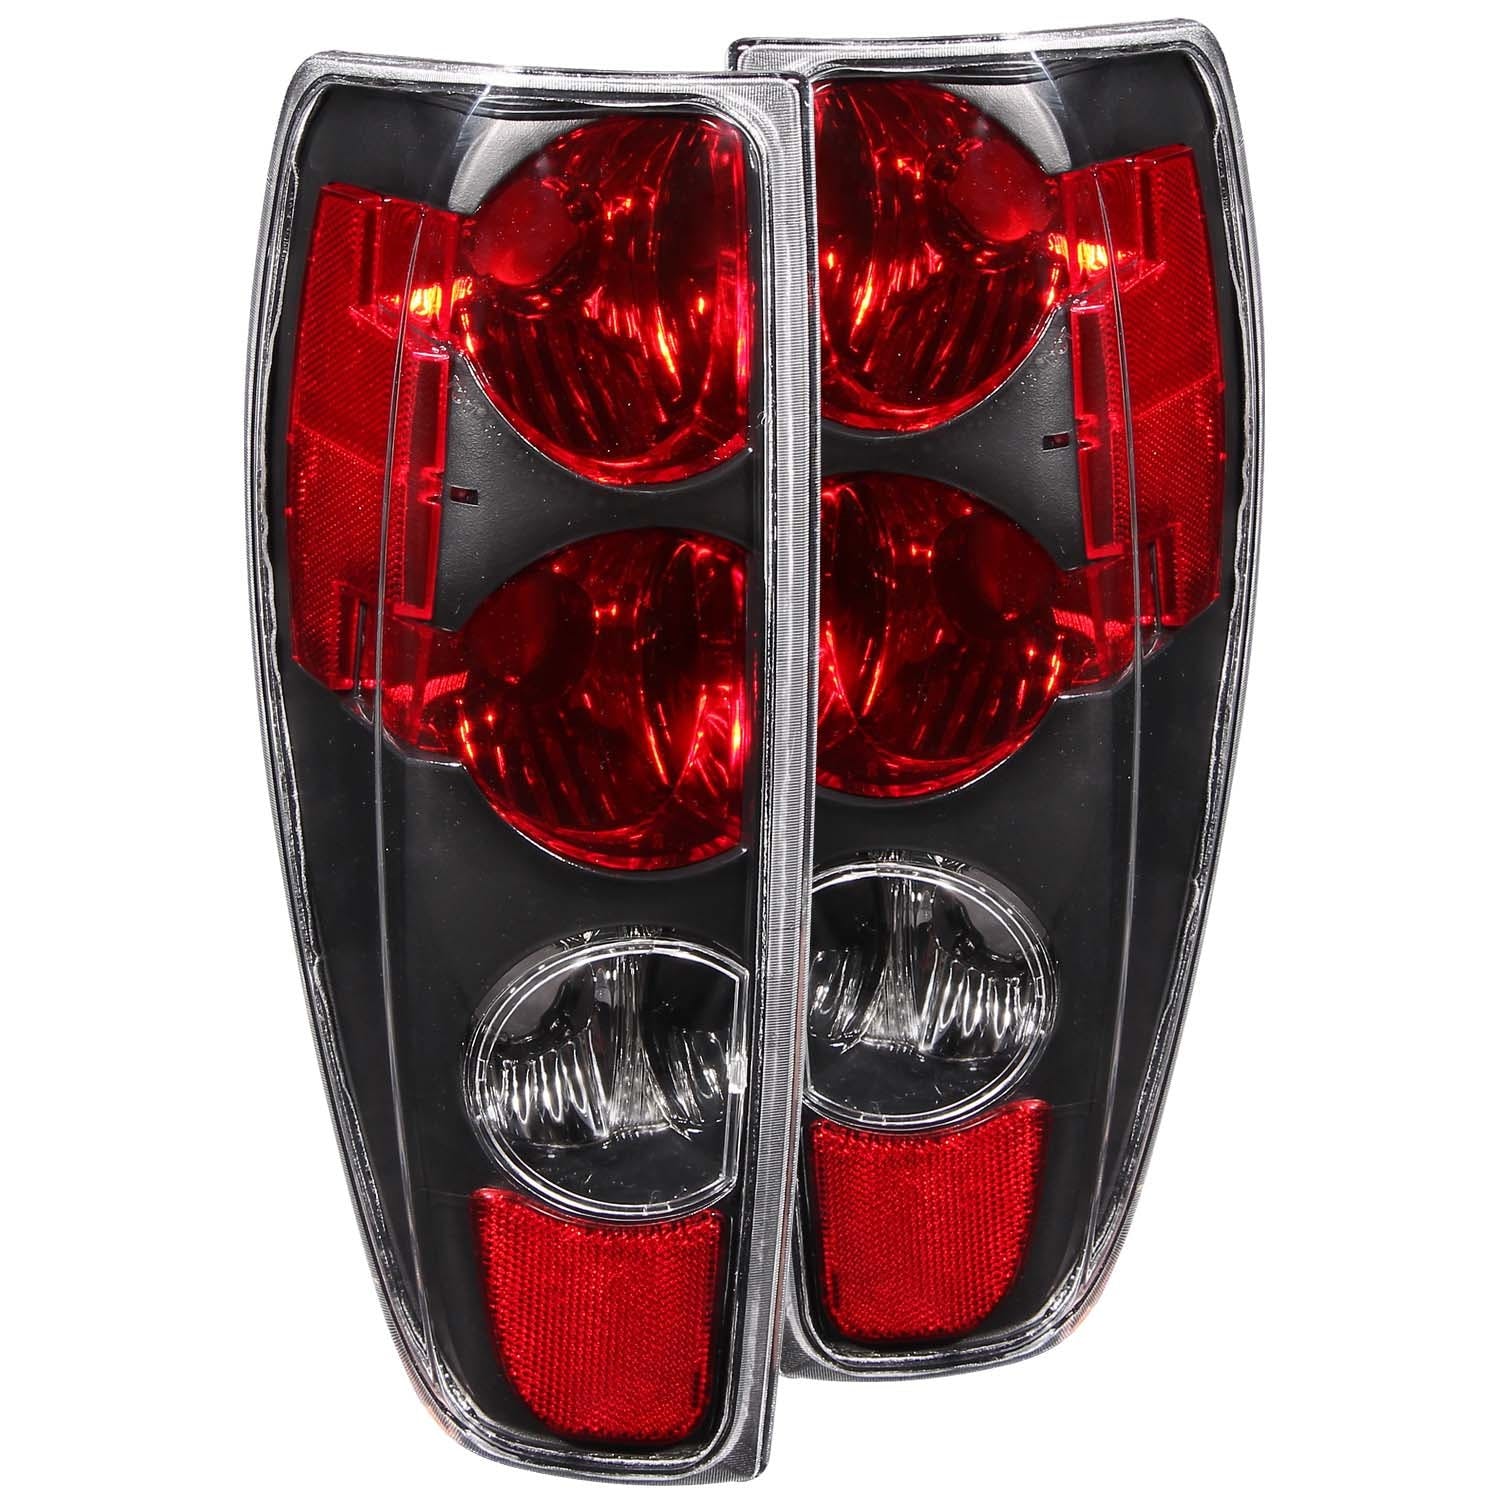 AnzoUSA 211007 Taillights Black